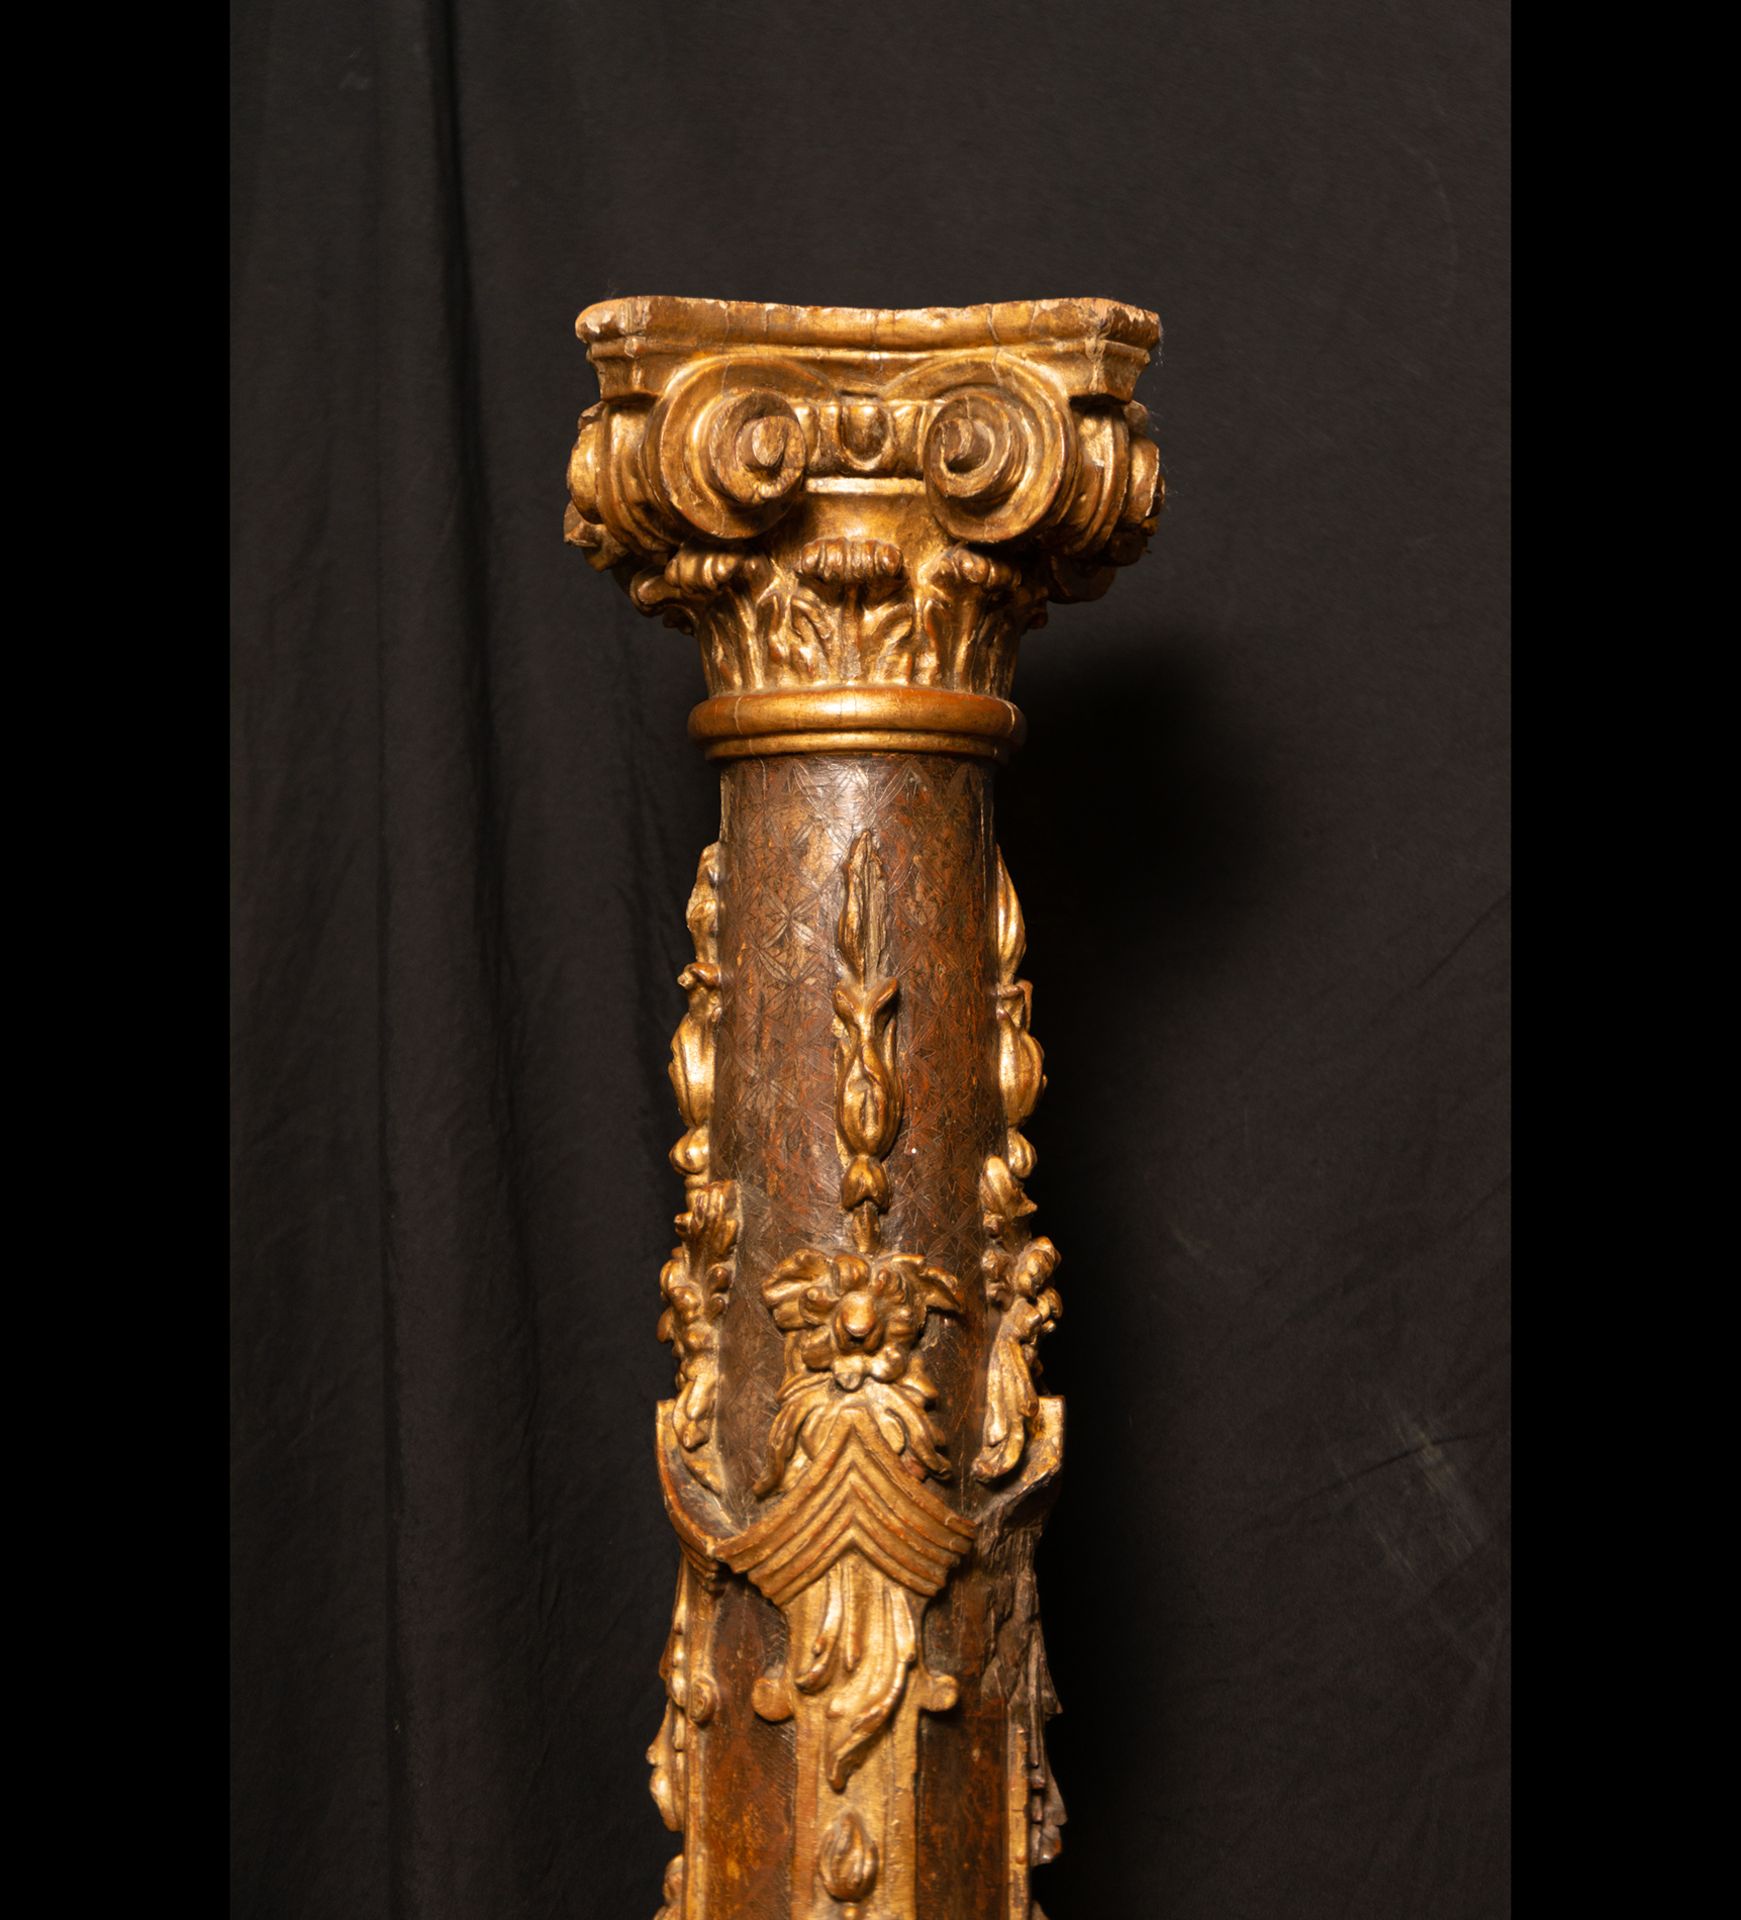 Important pair of Baroque Columns in gilded wood, Sevillian school of the 17th century - Image 11 of 16